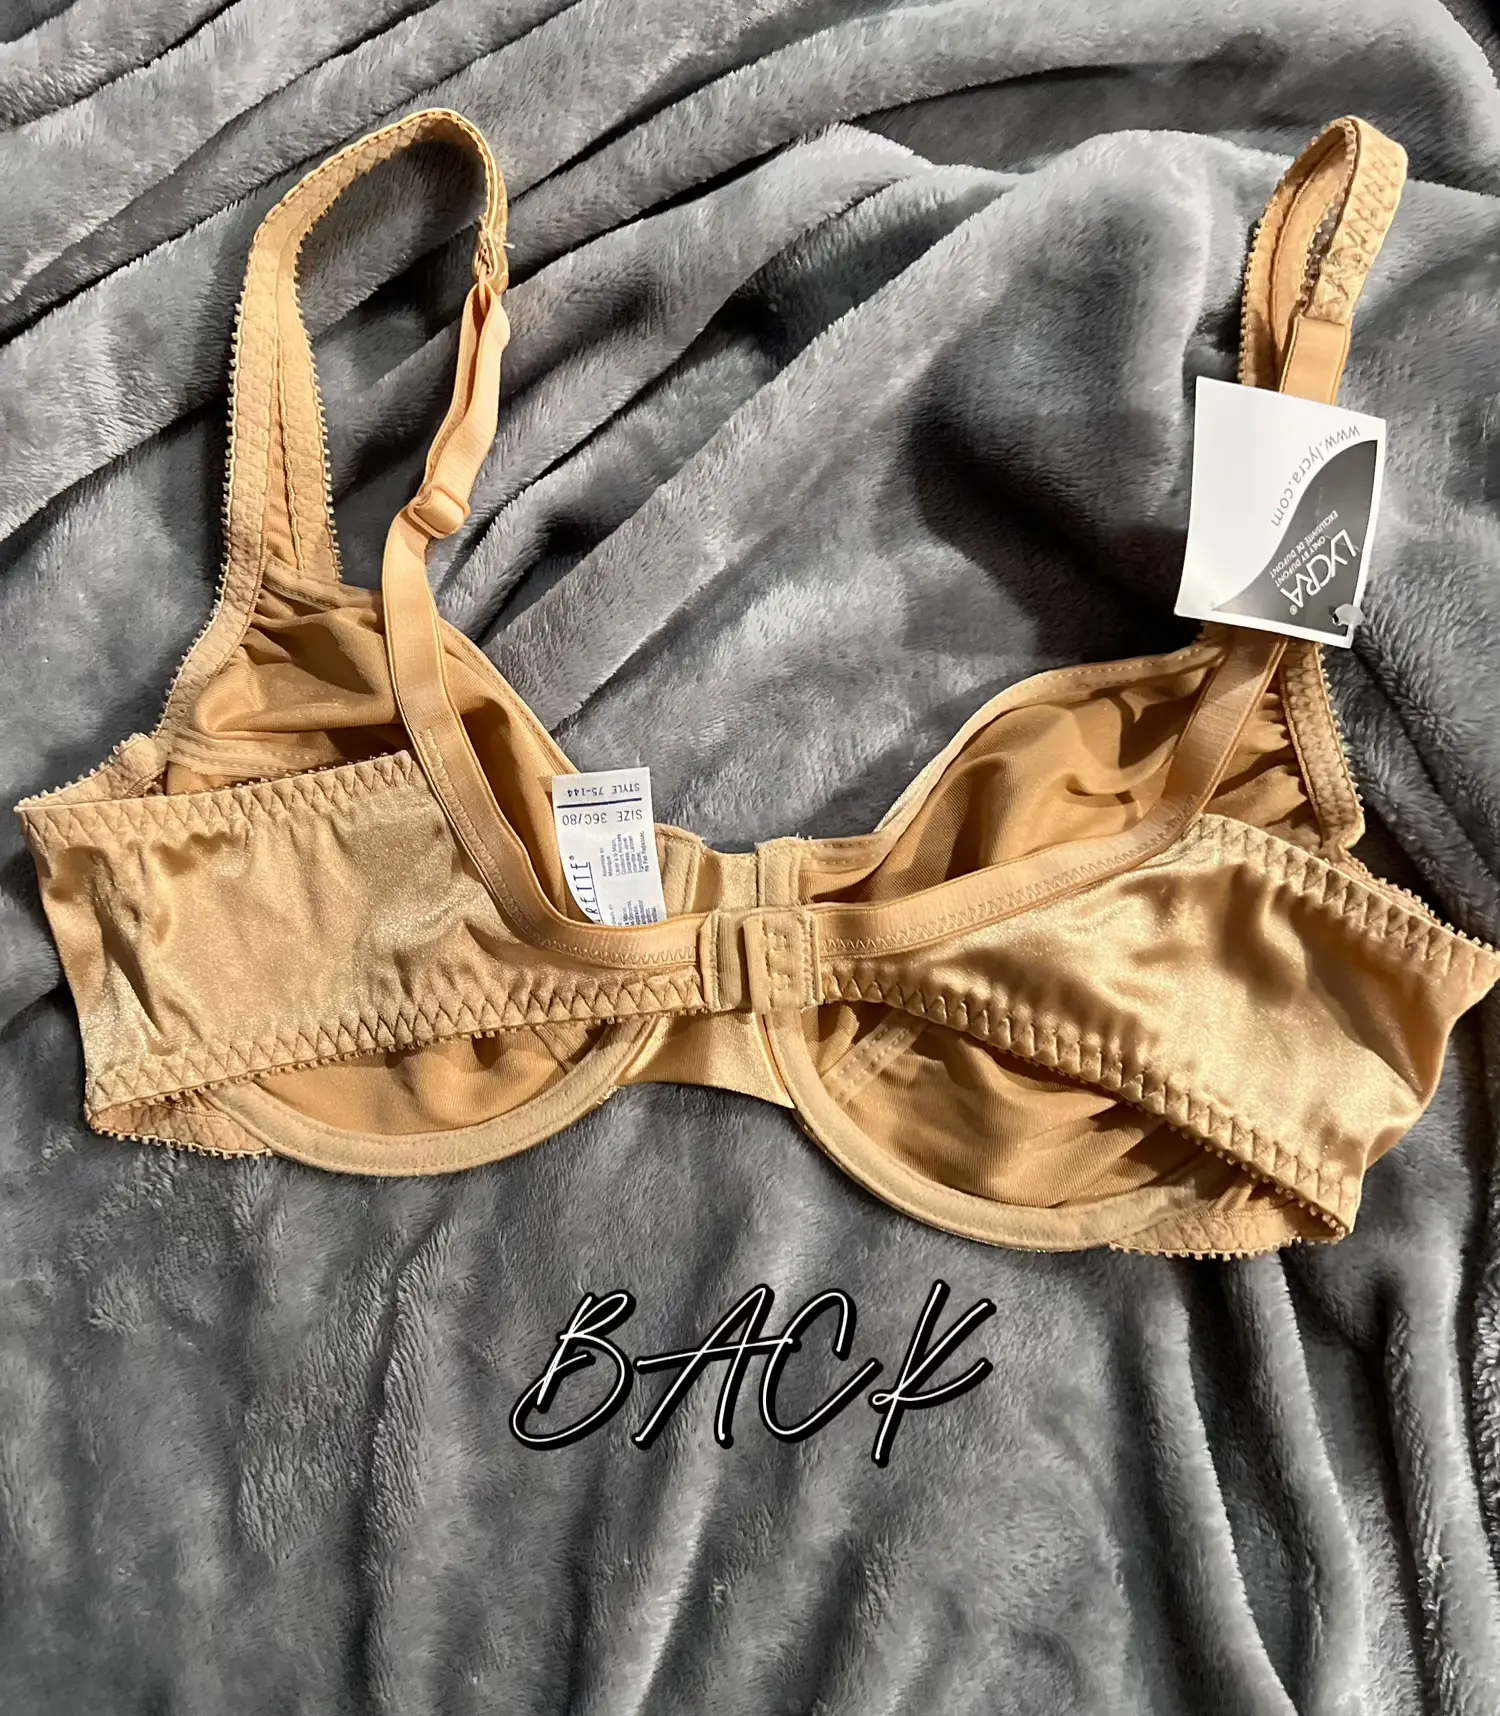 Are You Wearing Your BOOMBA Inserts Right? – Aimees Intimates